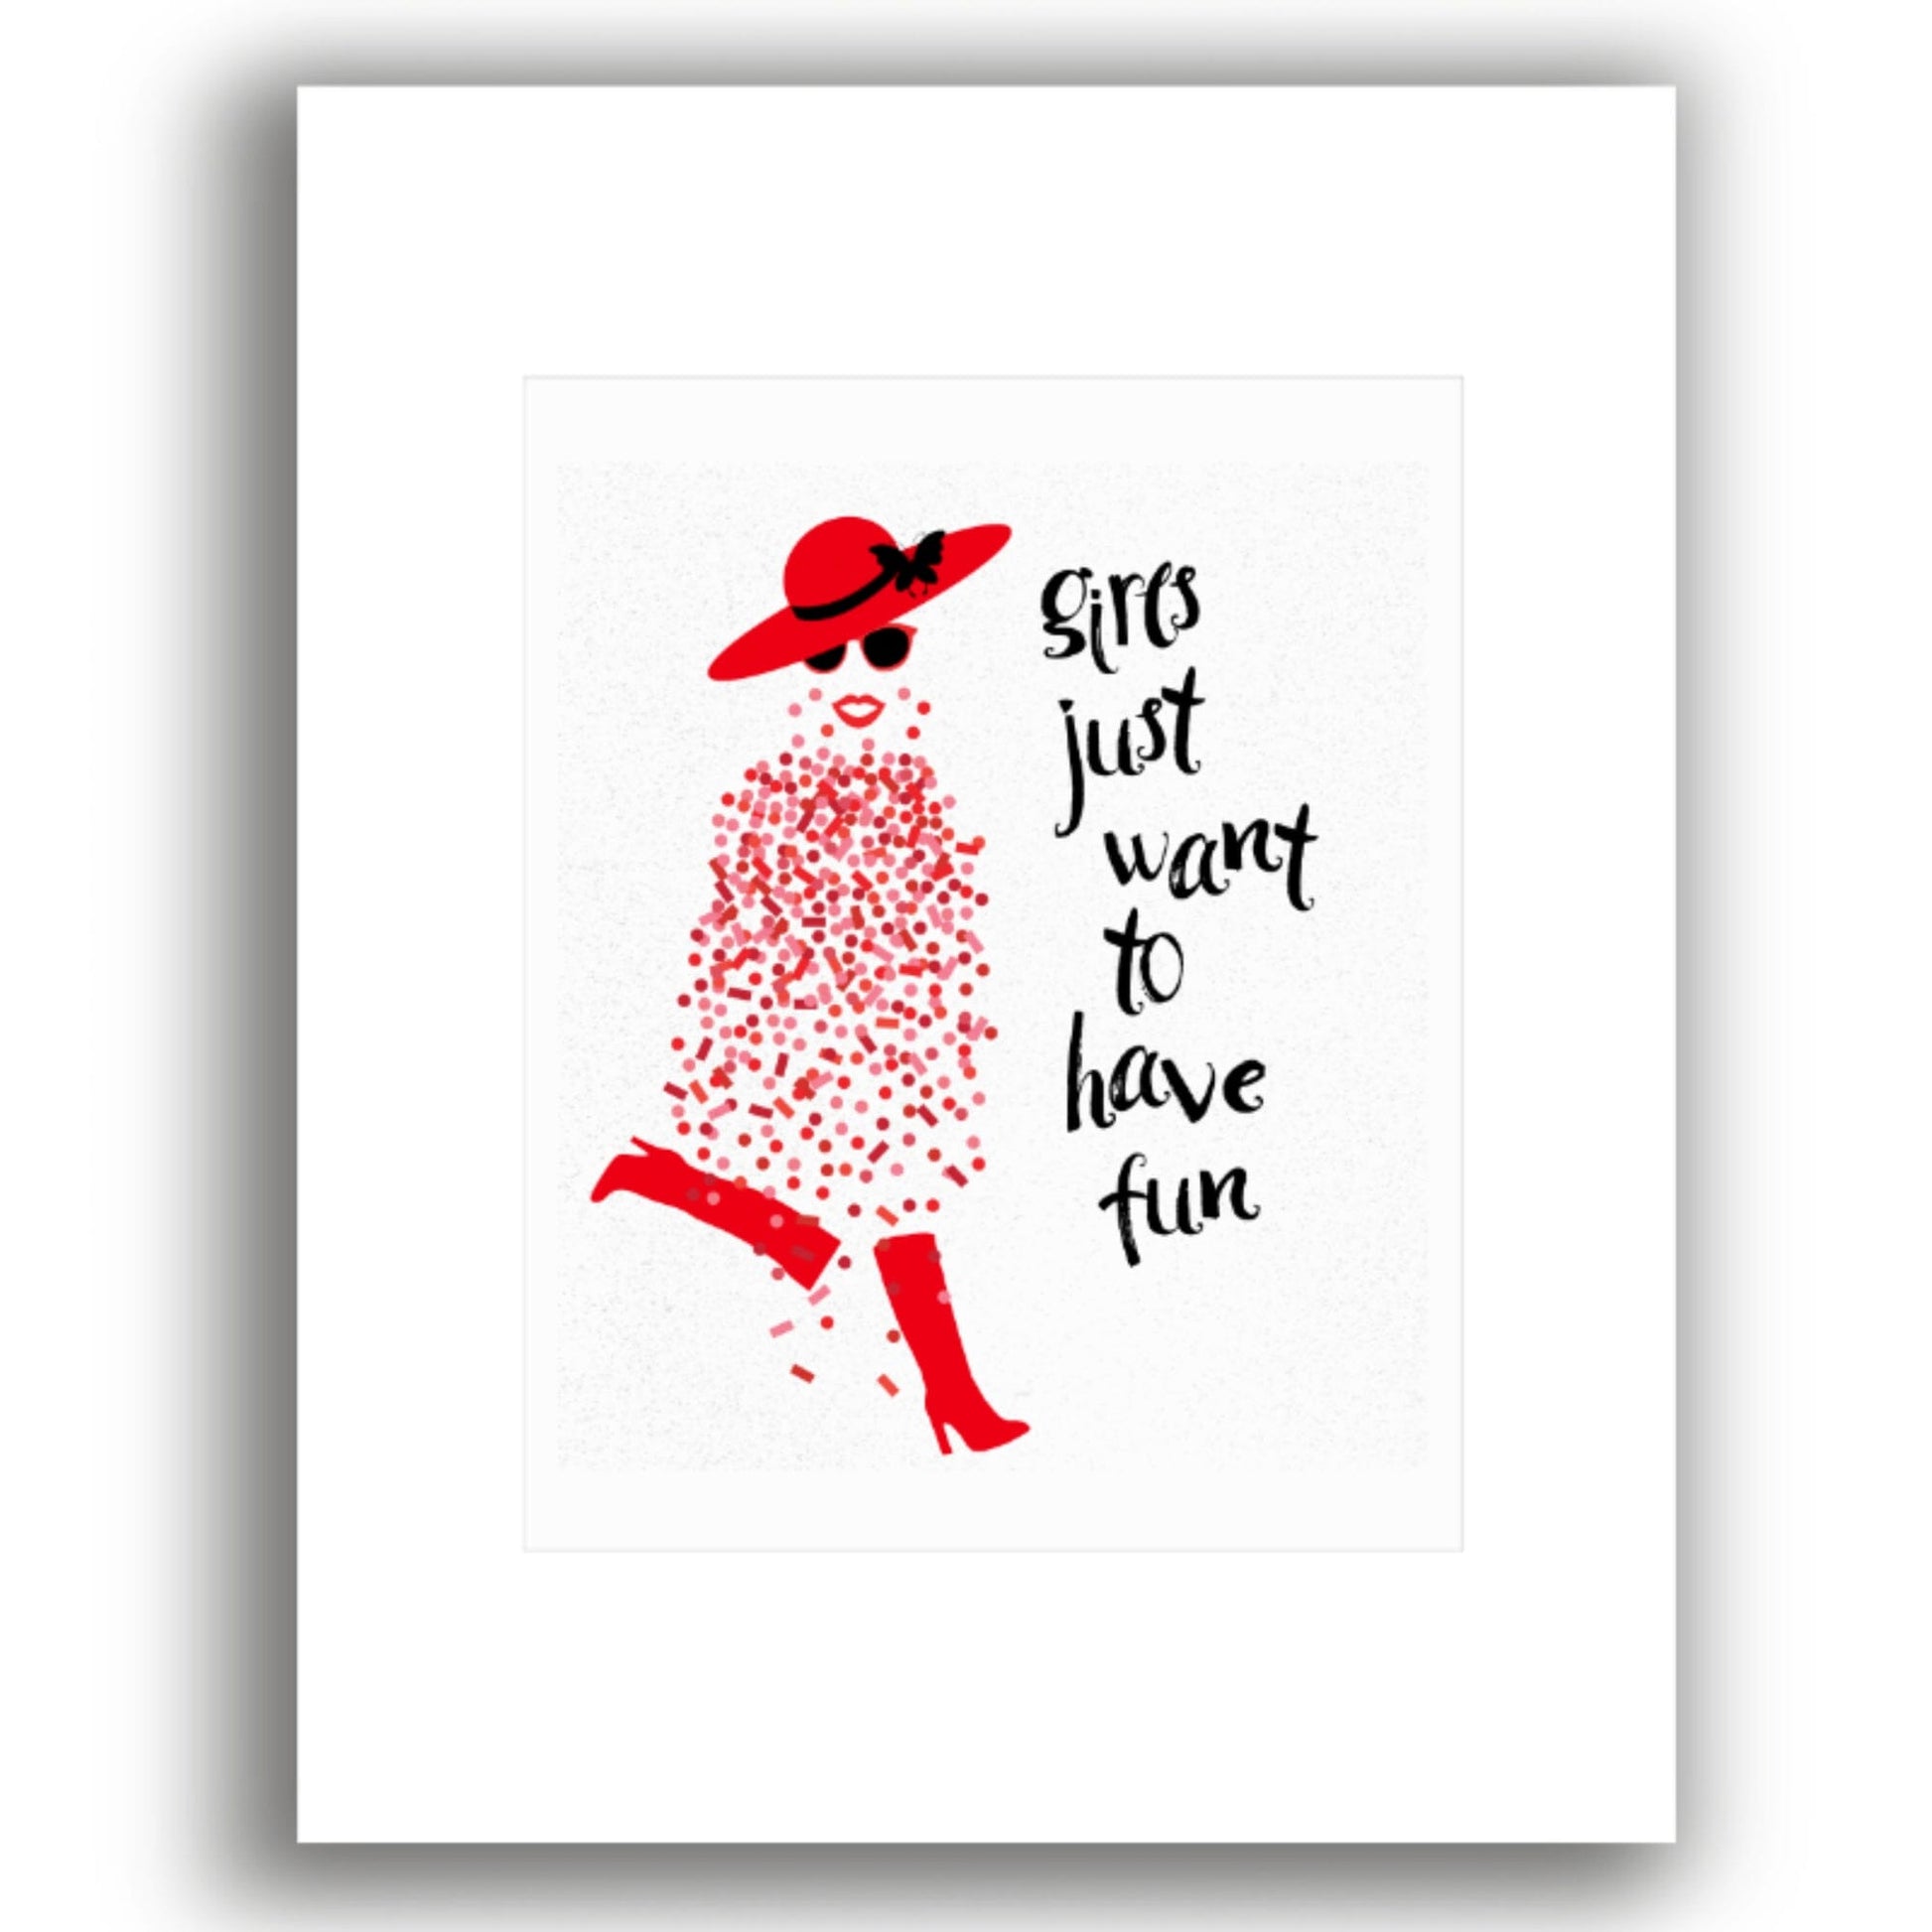 Girls Just Want to Have Fun by Cyndi Lauper - Lyric Inspired Art Song Lyrics Art Song Lyrics Art 8x10 White Matted Print 